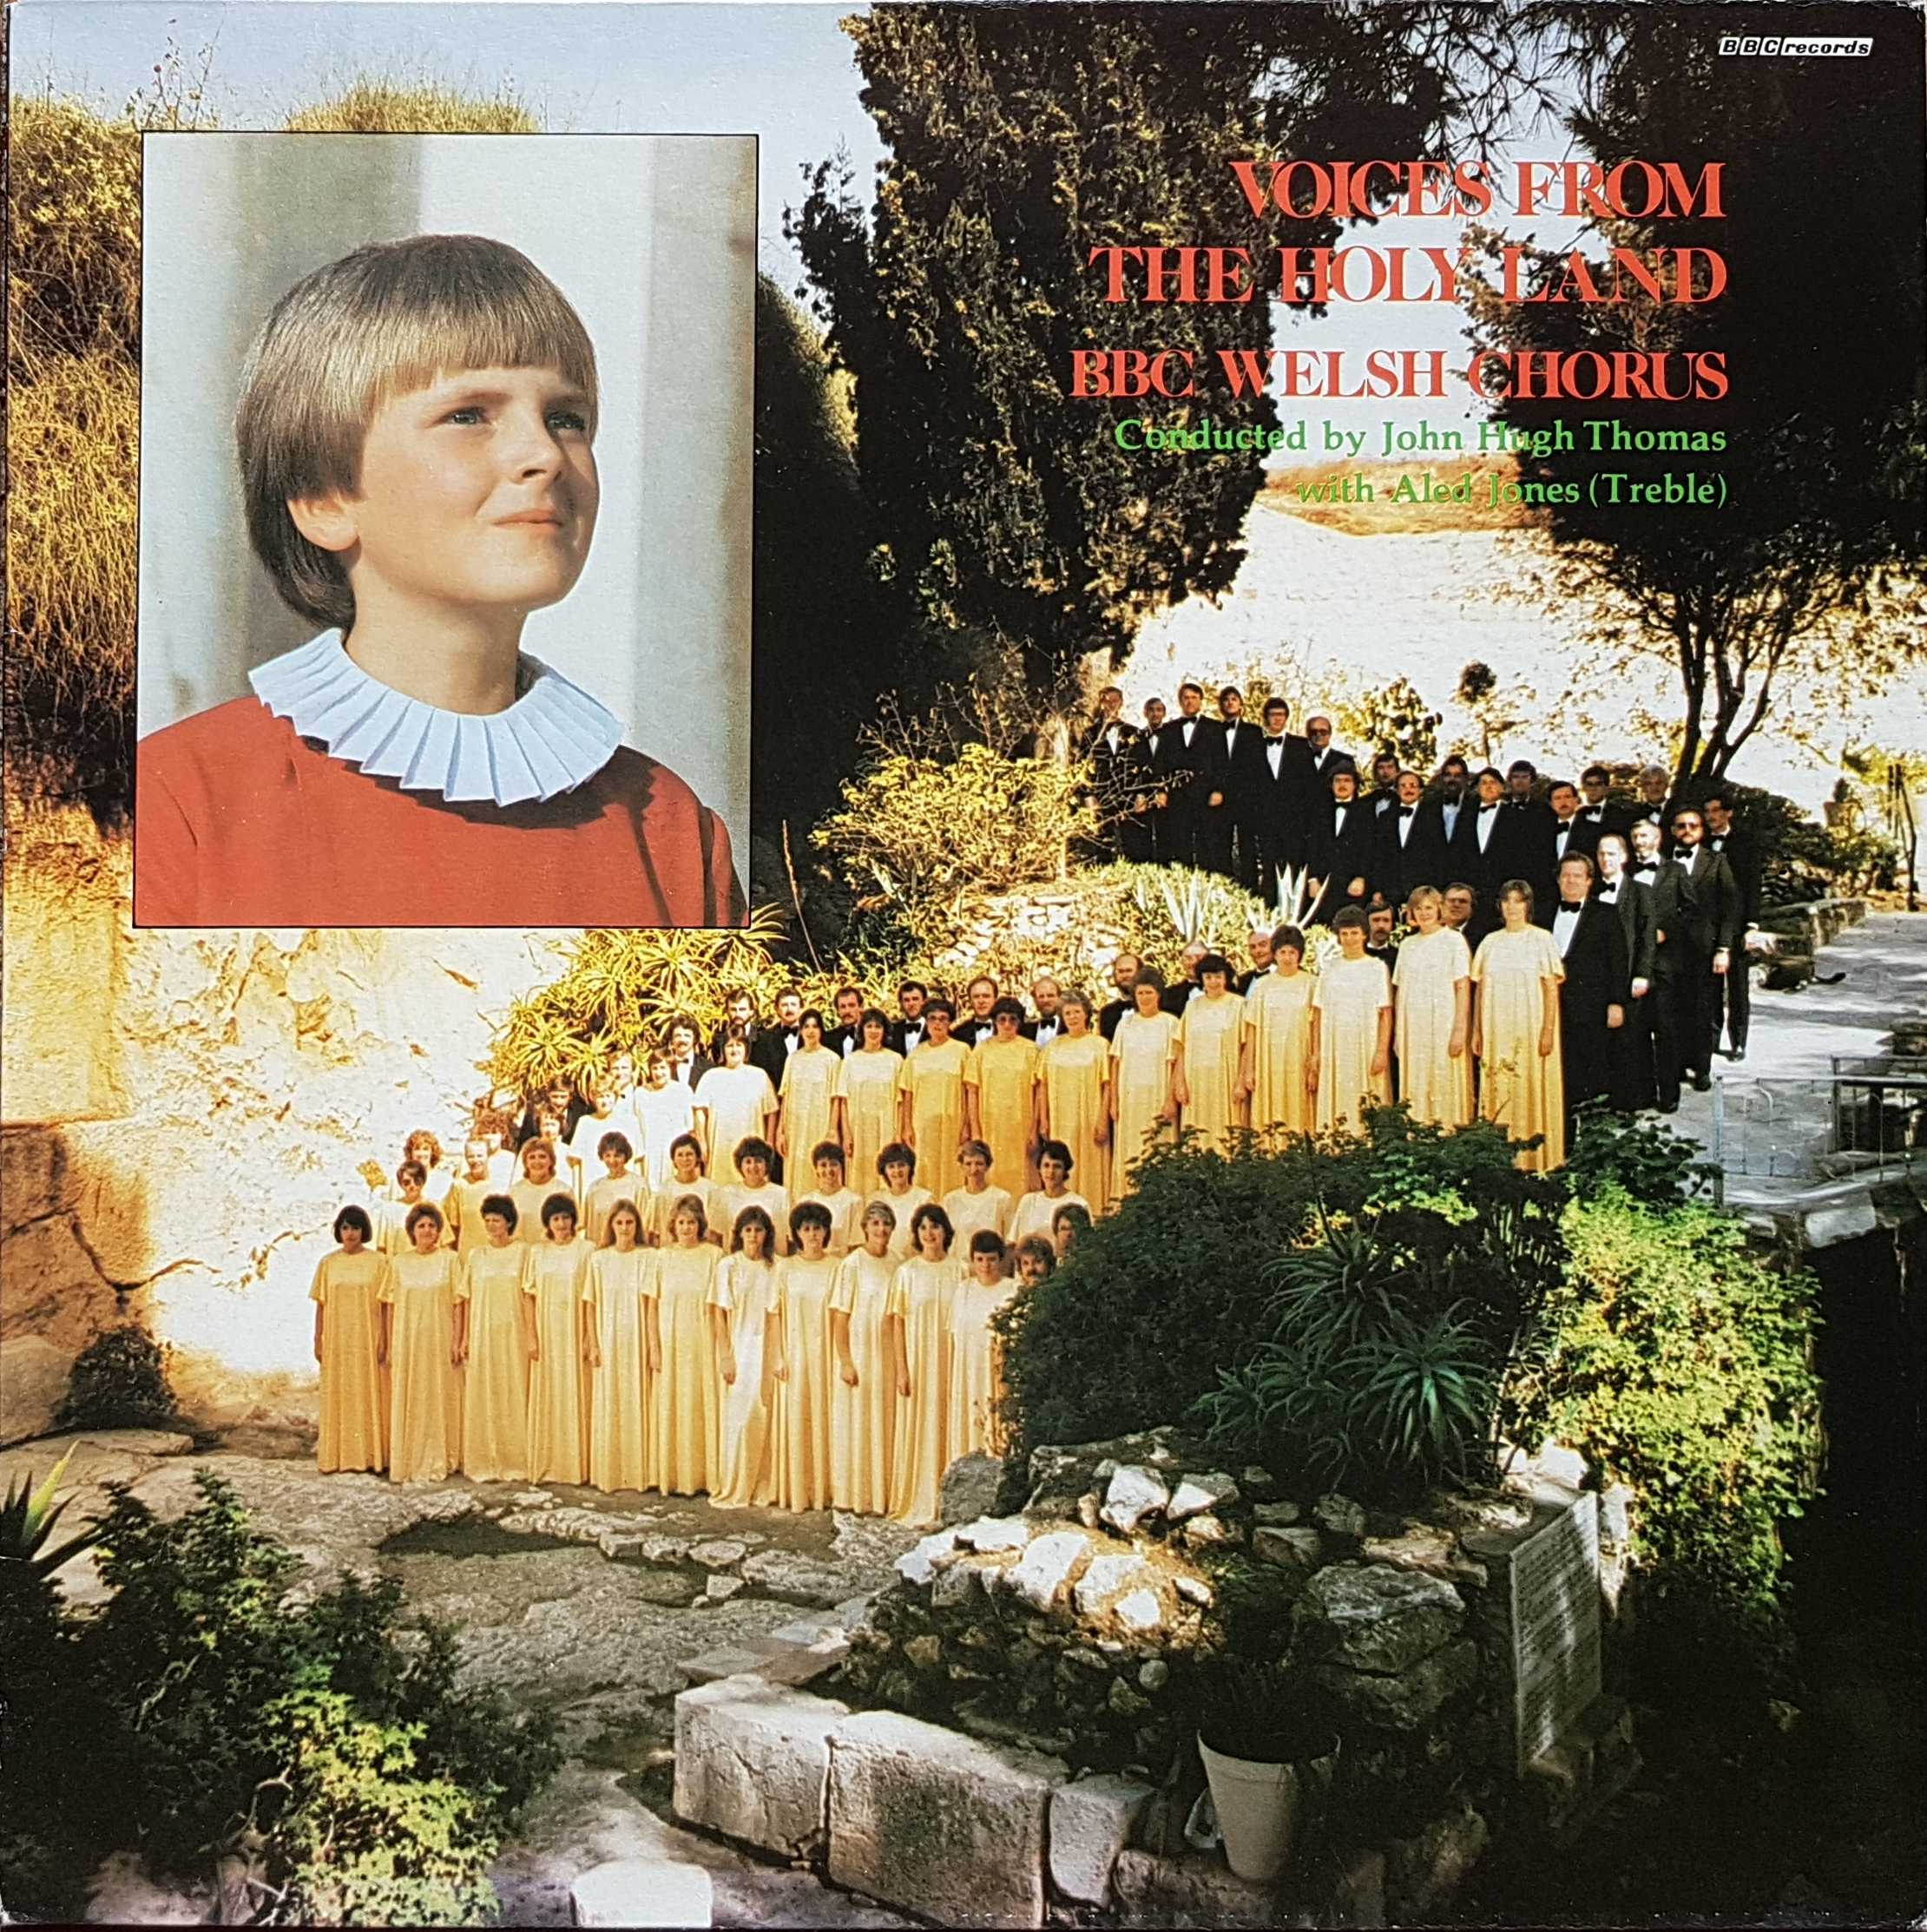 Picture of REC 564 Voices from the Holy Land by artist Various from the BBC albums - Records and Tapes library